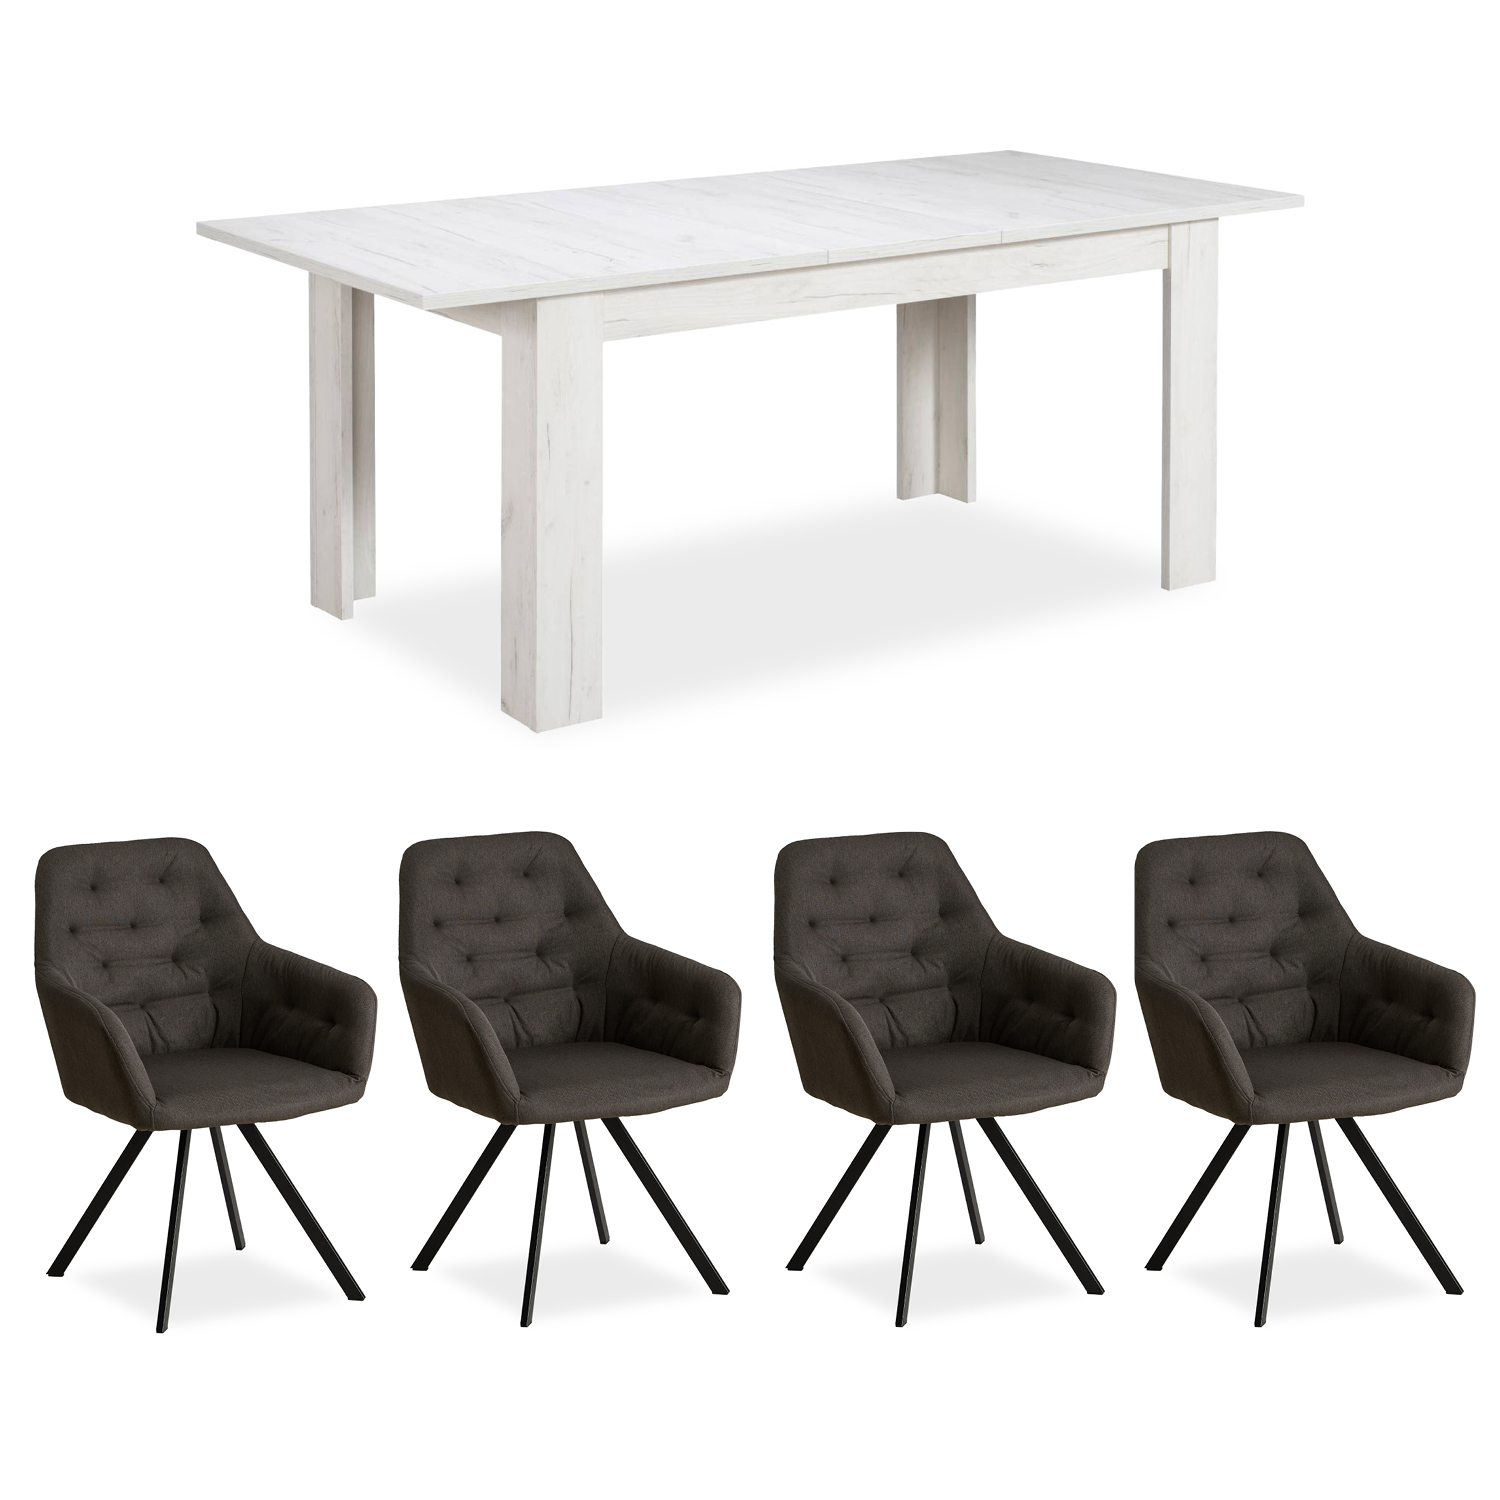 Dining Table 160x90 cm Extendable with 4 Chairs Anthracite Dining Room Table Wooden Table White